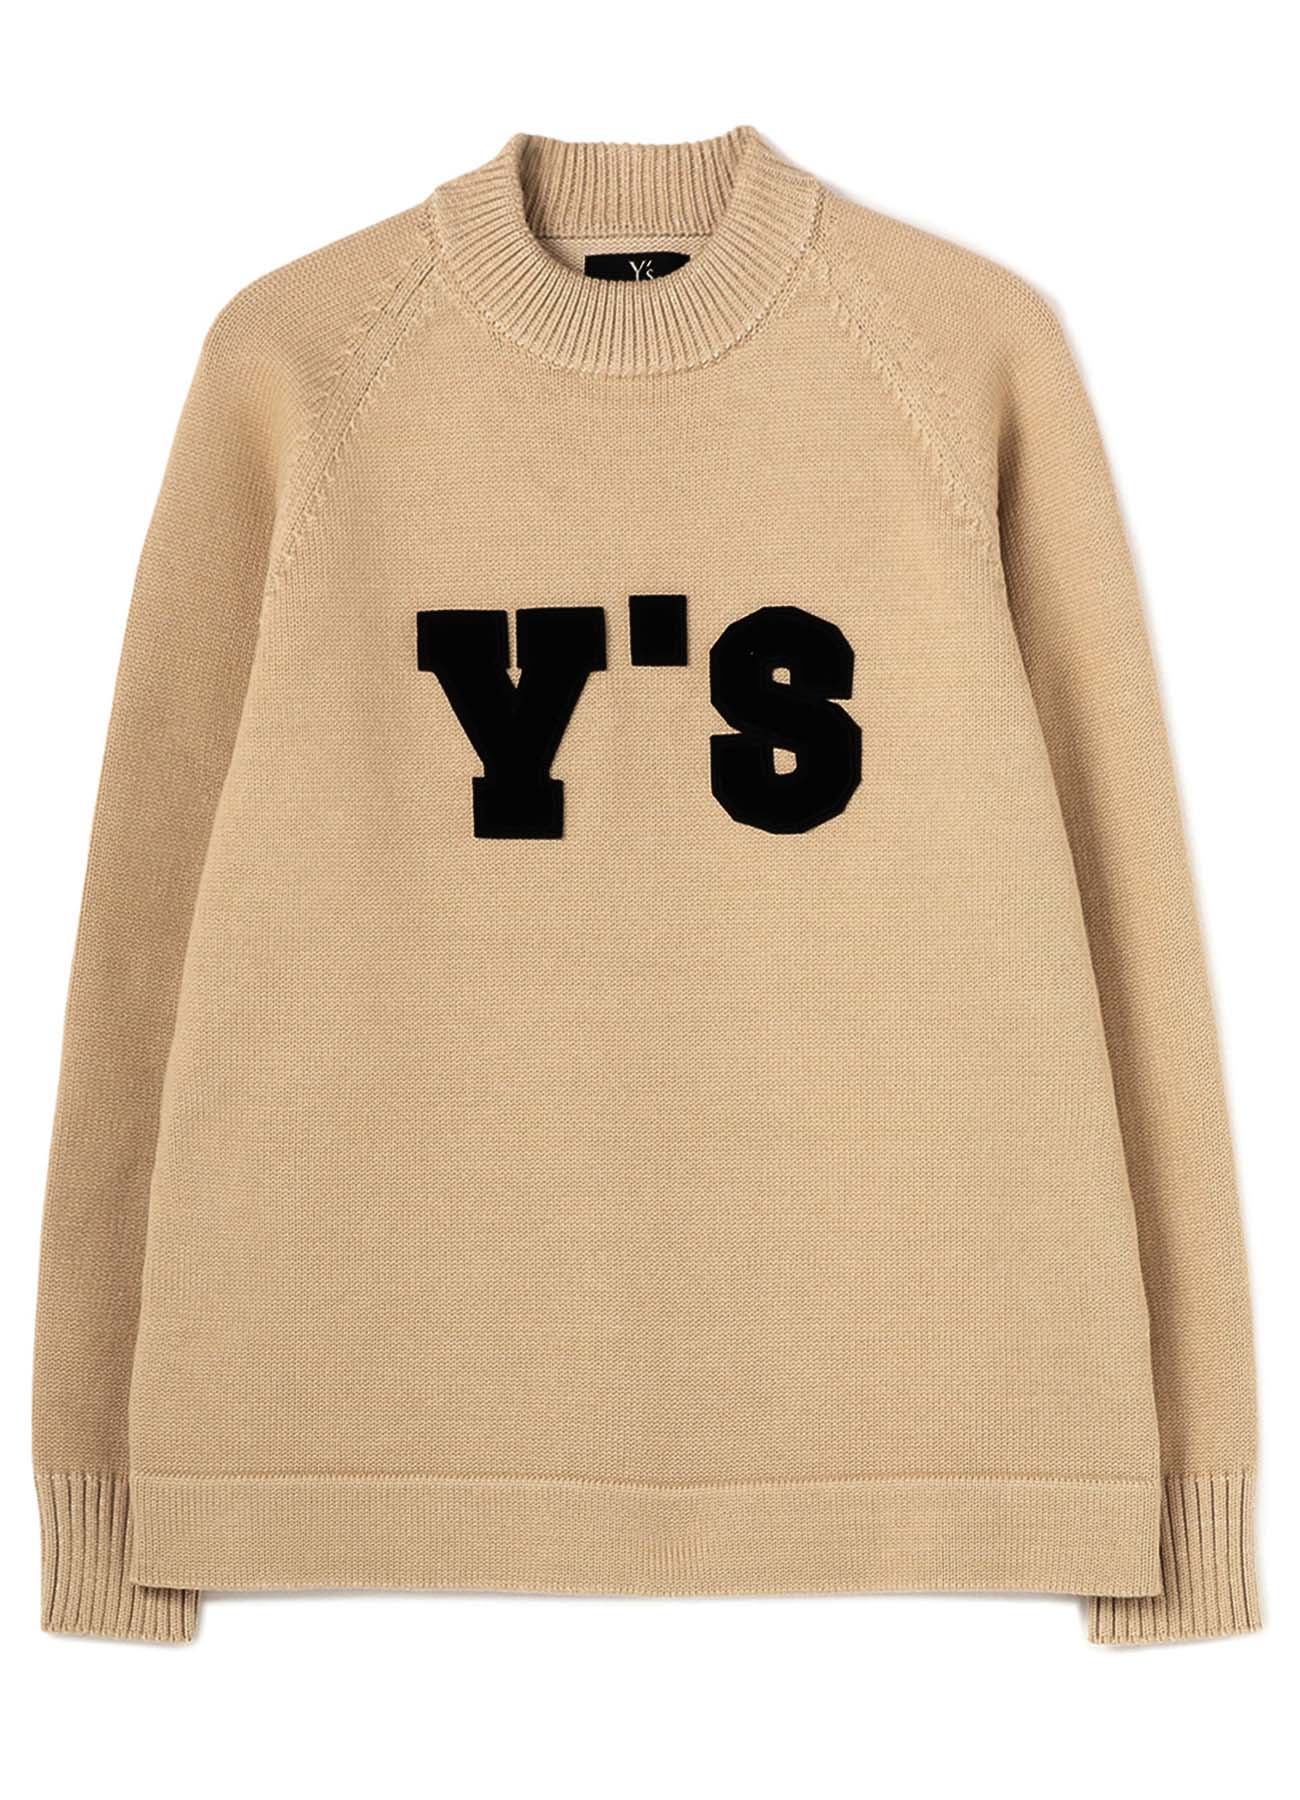 [Y's 1972 - Traditions] COTTON POLYESTER Y's PULLOVER KNIT